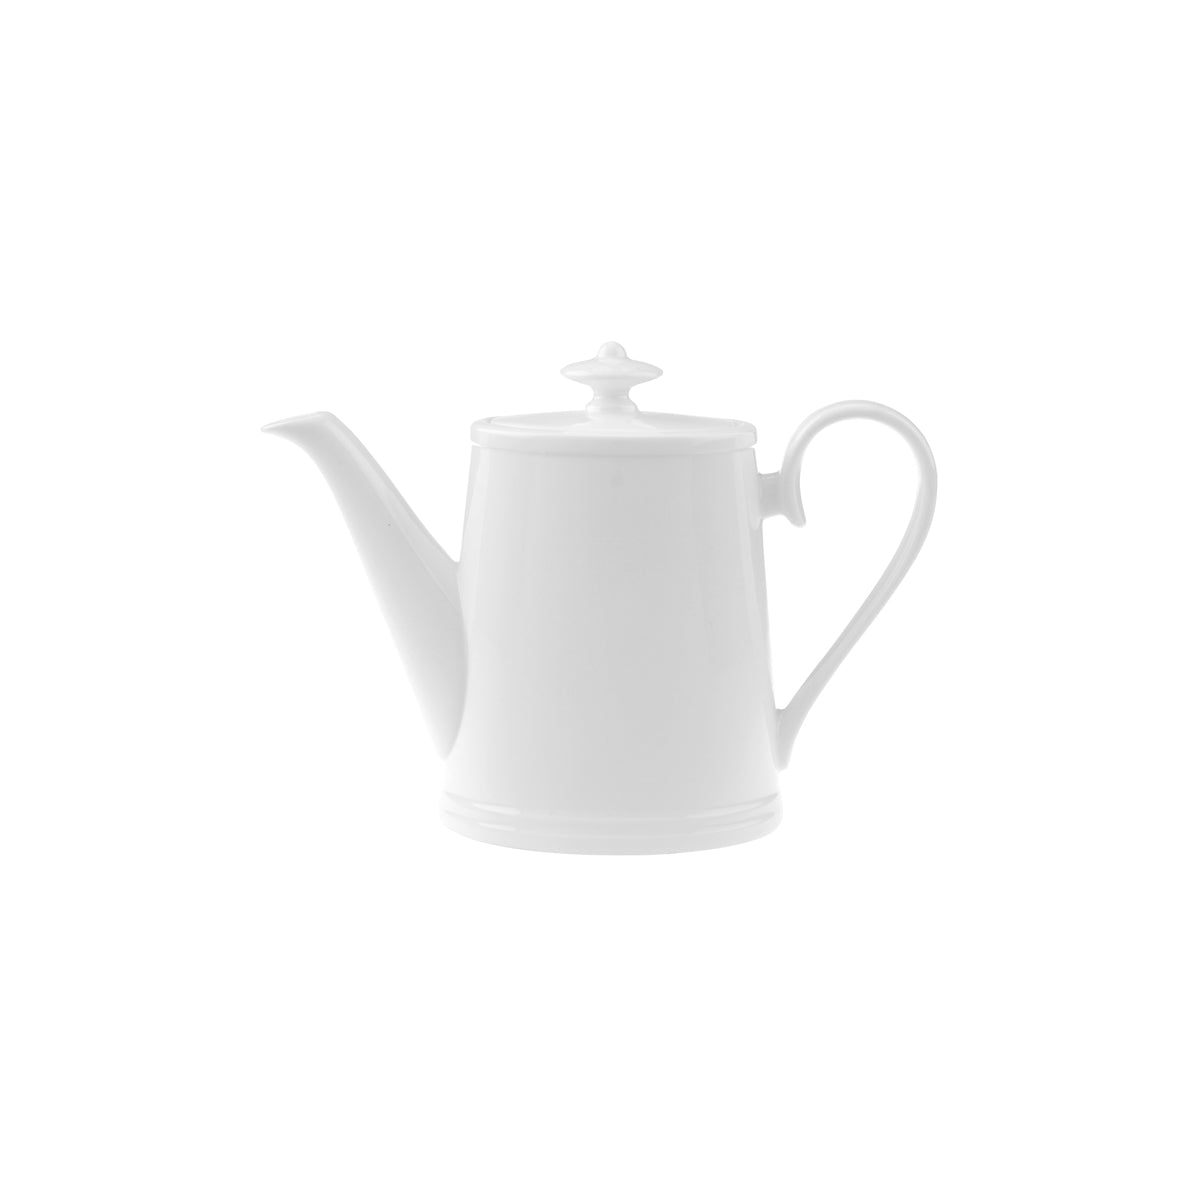 VB16-3272-0220 Villeroy And Boch Villeroy And Boch Stella Hotel White Coffee Pot No. 7 with Lid 300ml Tomkin Australia Hospitality Supplies